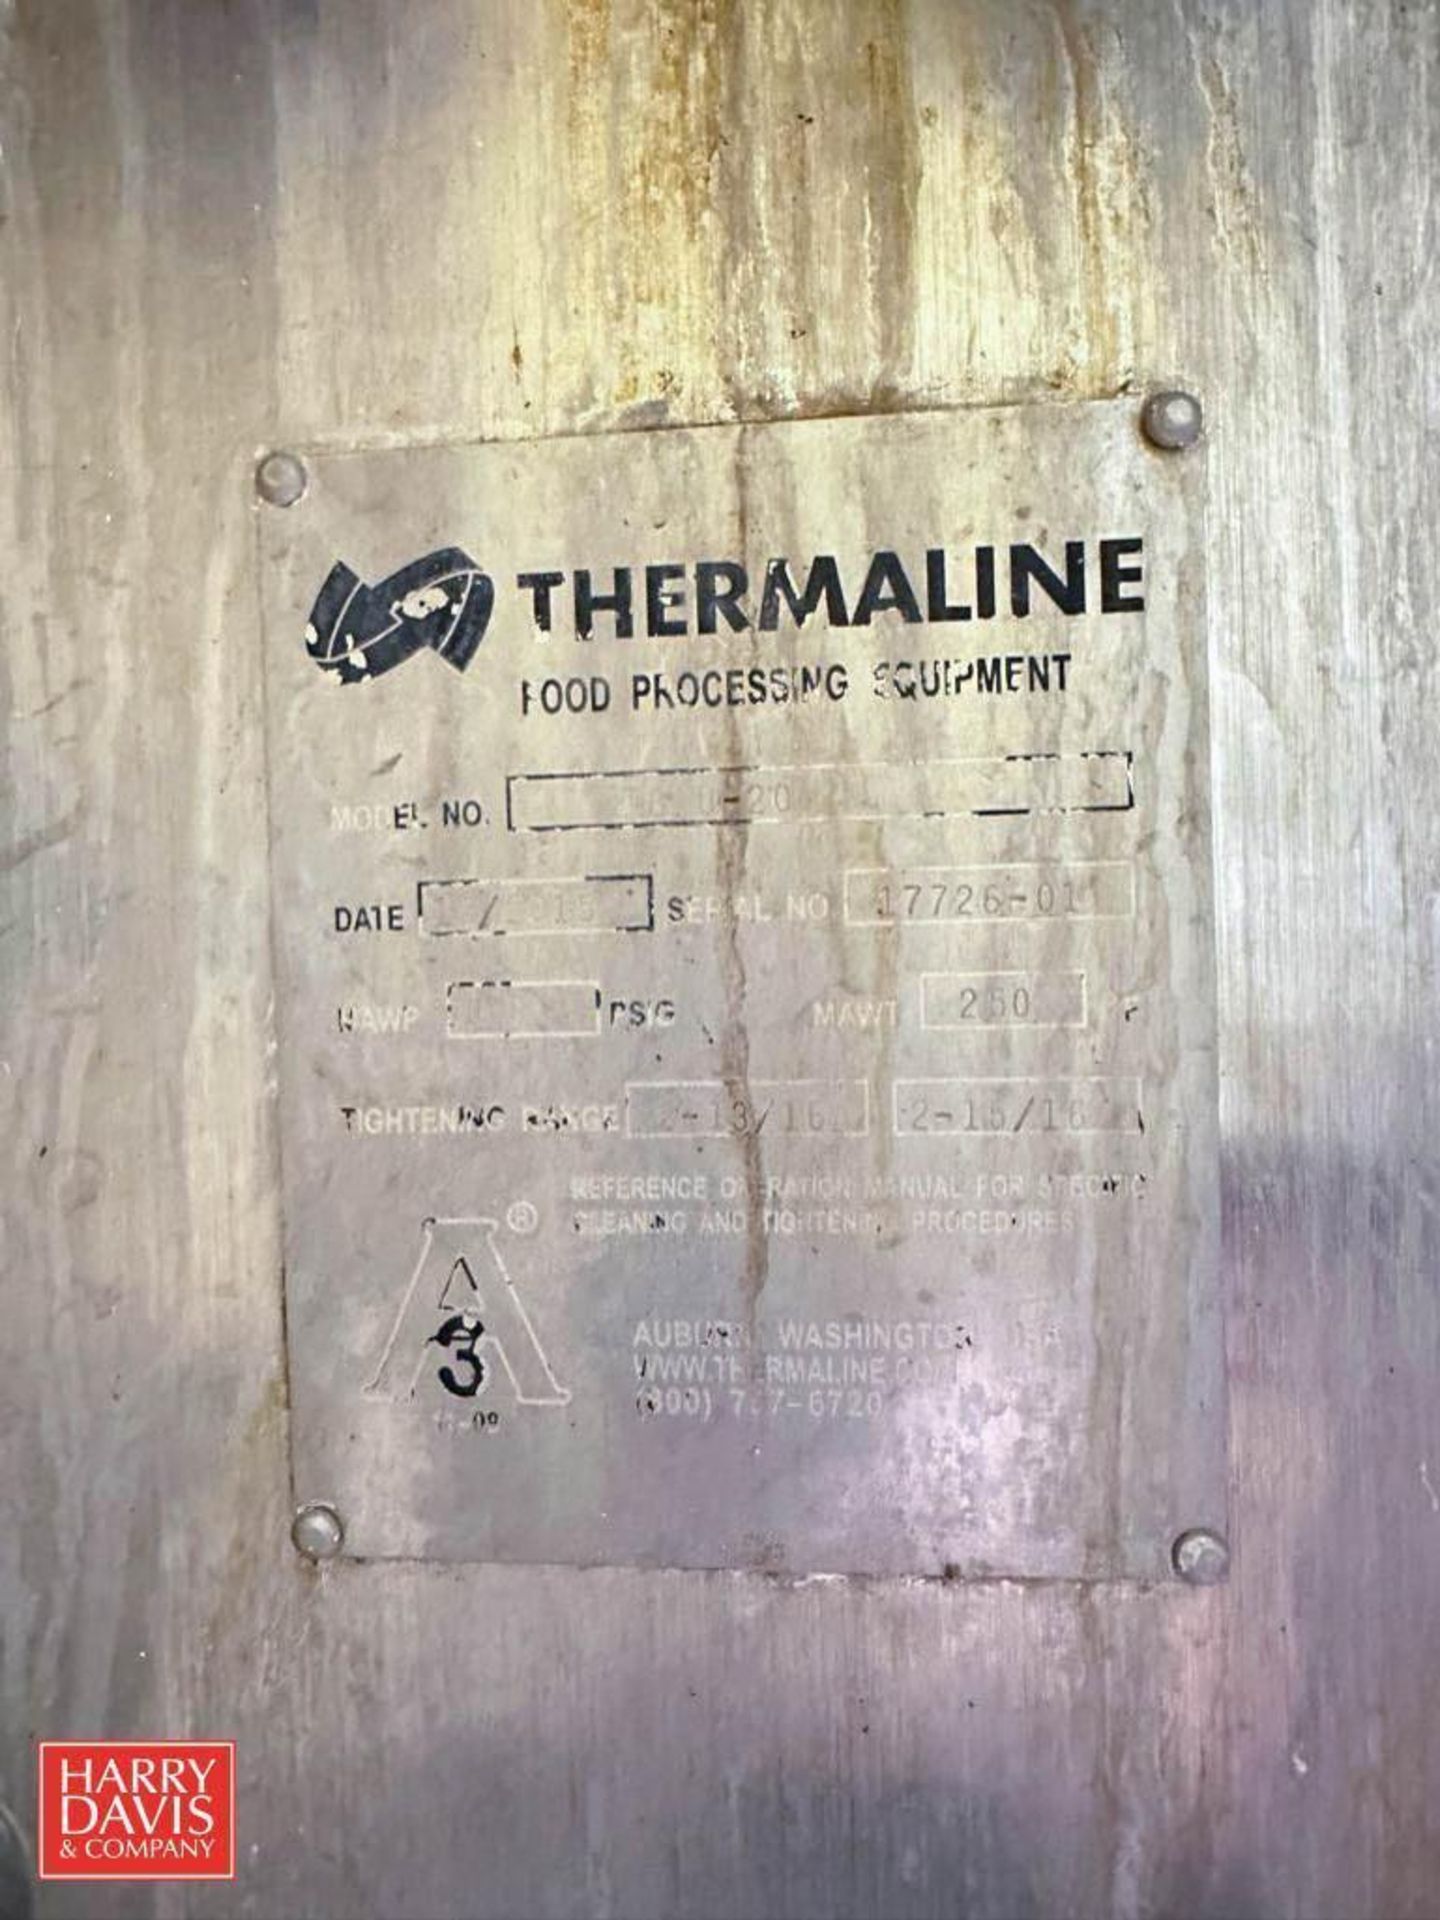 Thermaline Stack 1-Zone S/S Plate Heat Exchanger(s), Model: T8U-20, S/N: 17726-02 with Valves, Gauge - Image 3 of 3